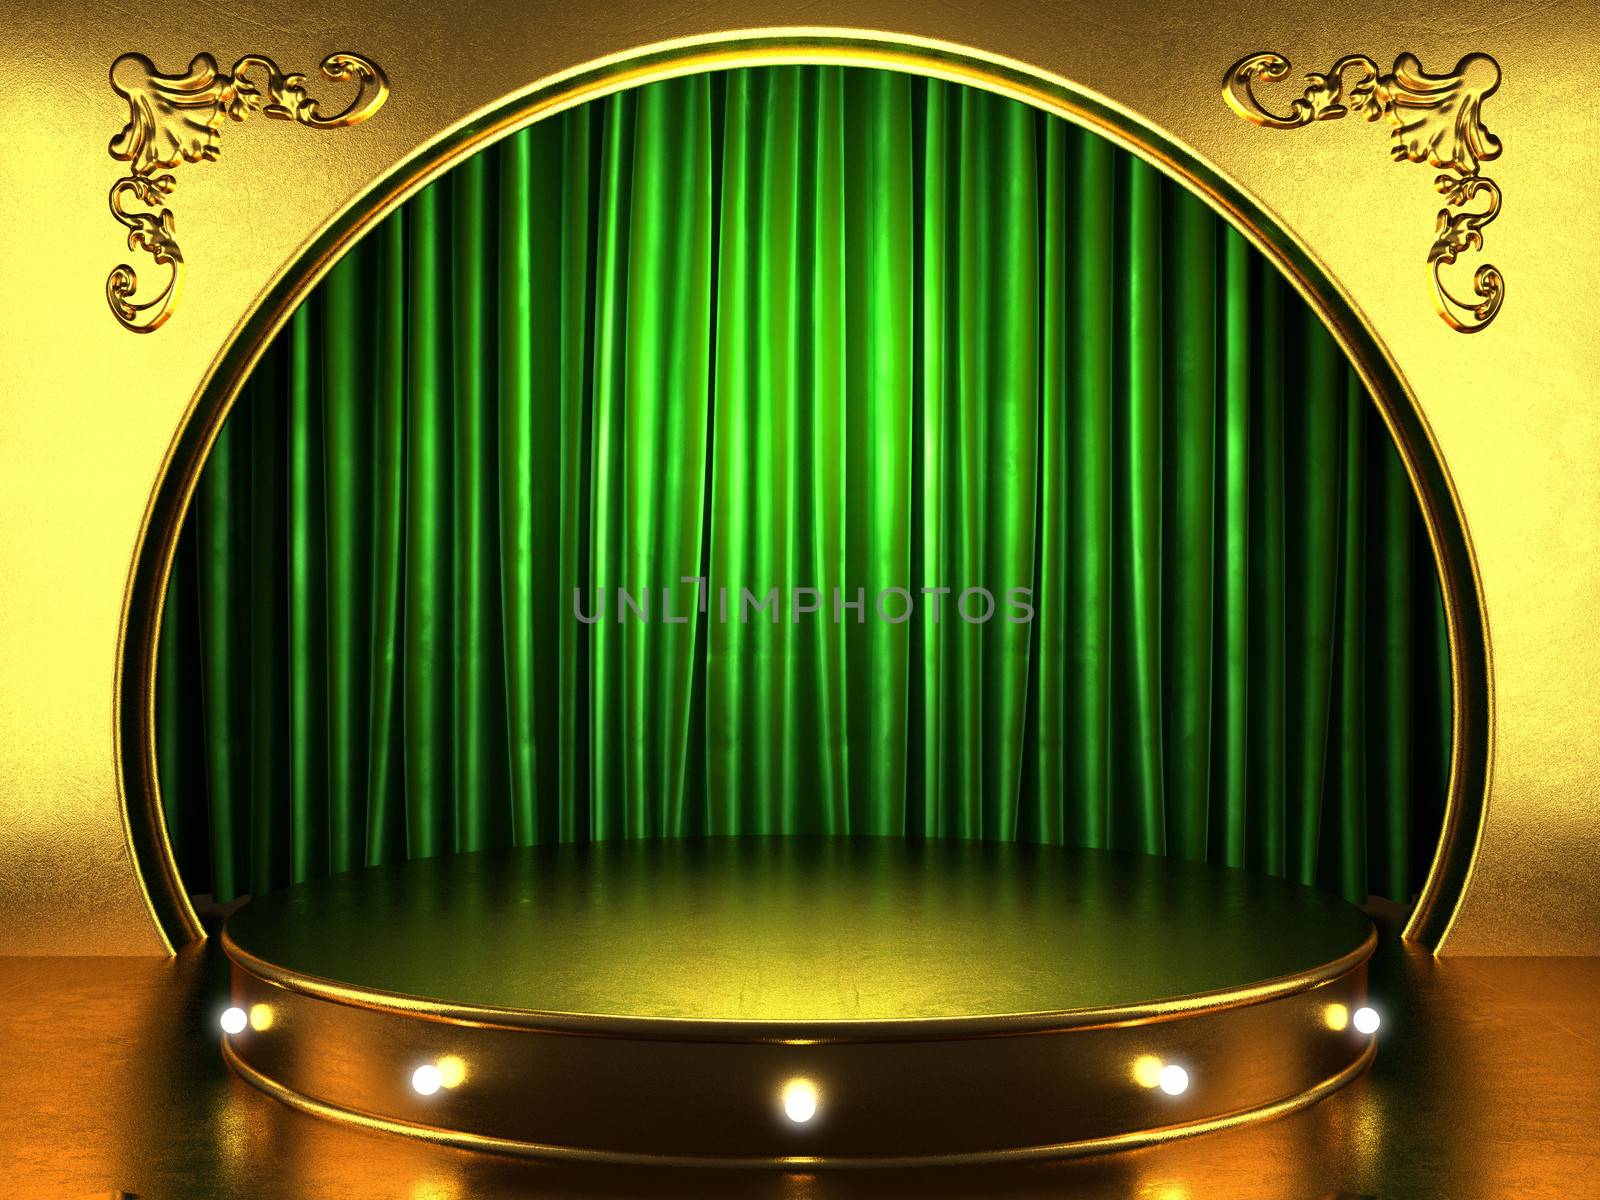 green fabric curtain with gold on stage by videodoctor